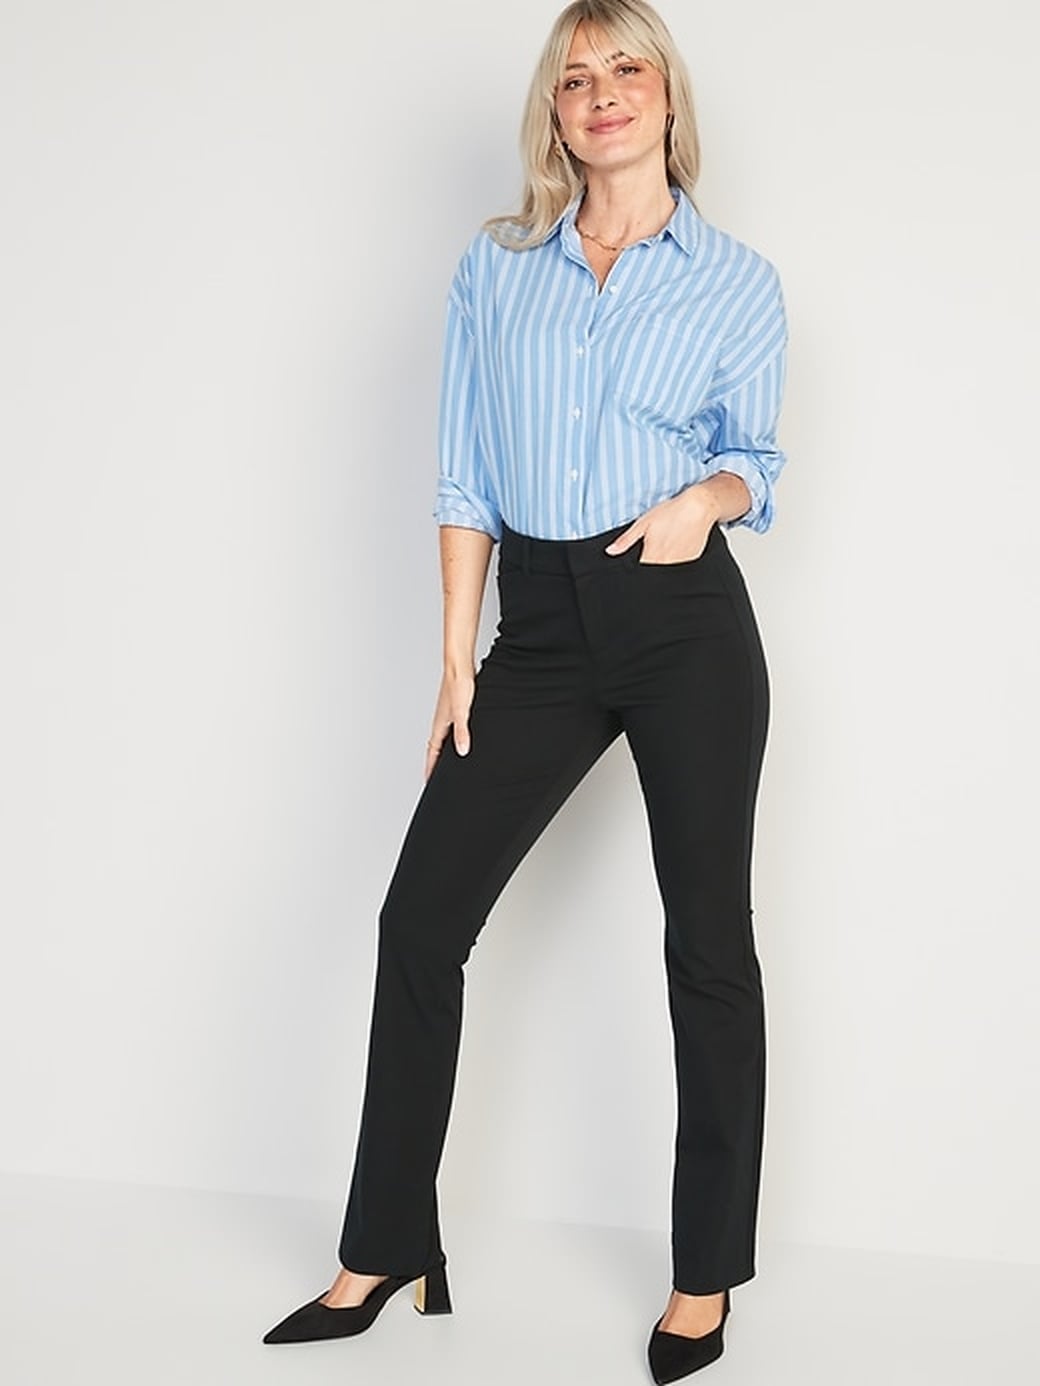 Comfortable Work Clothes From Old Navy | POPSUGAR Fashion